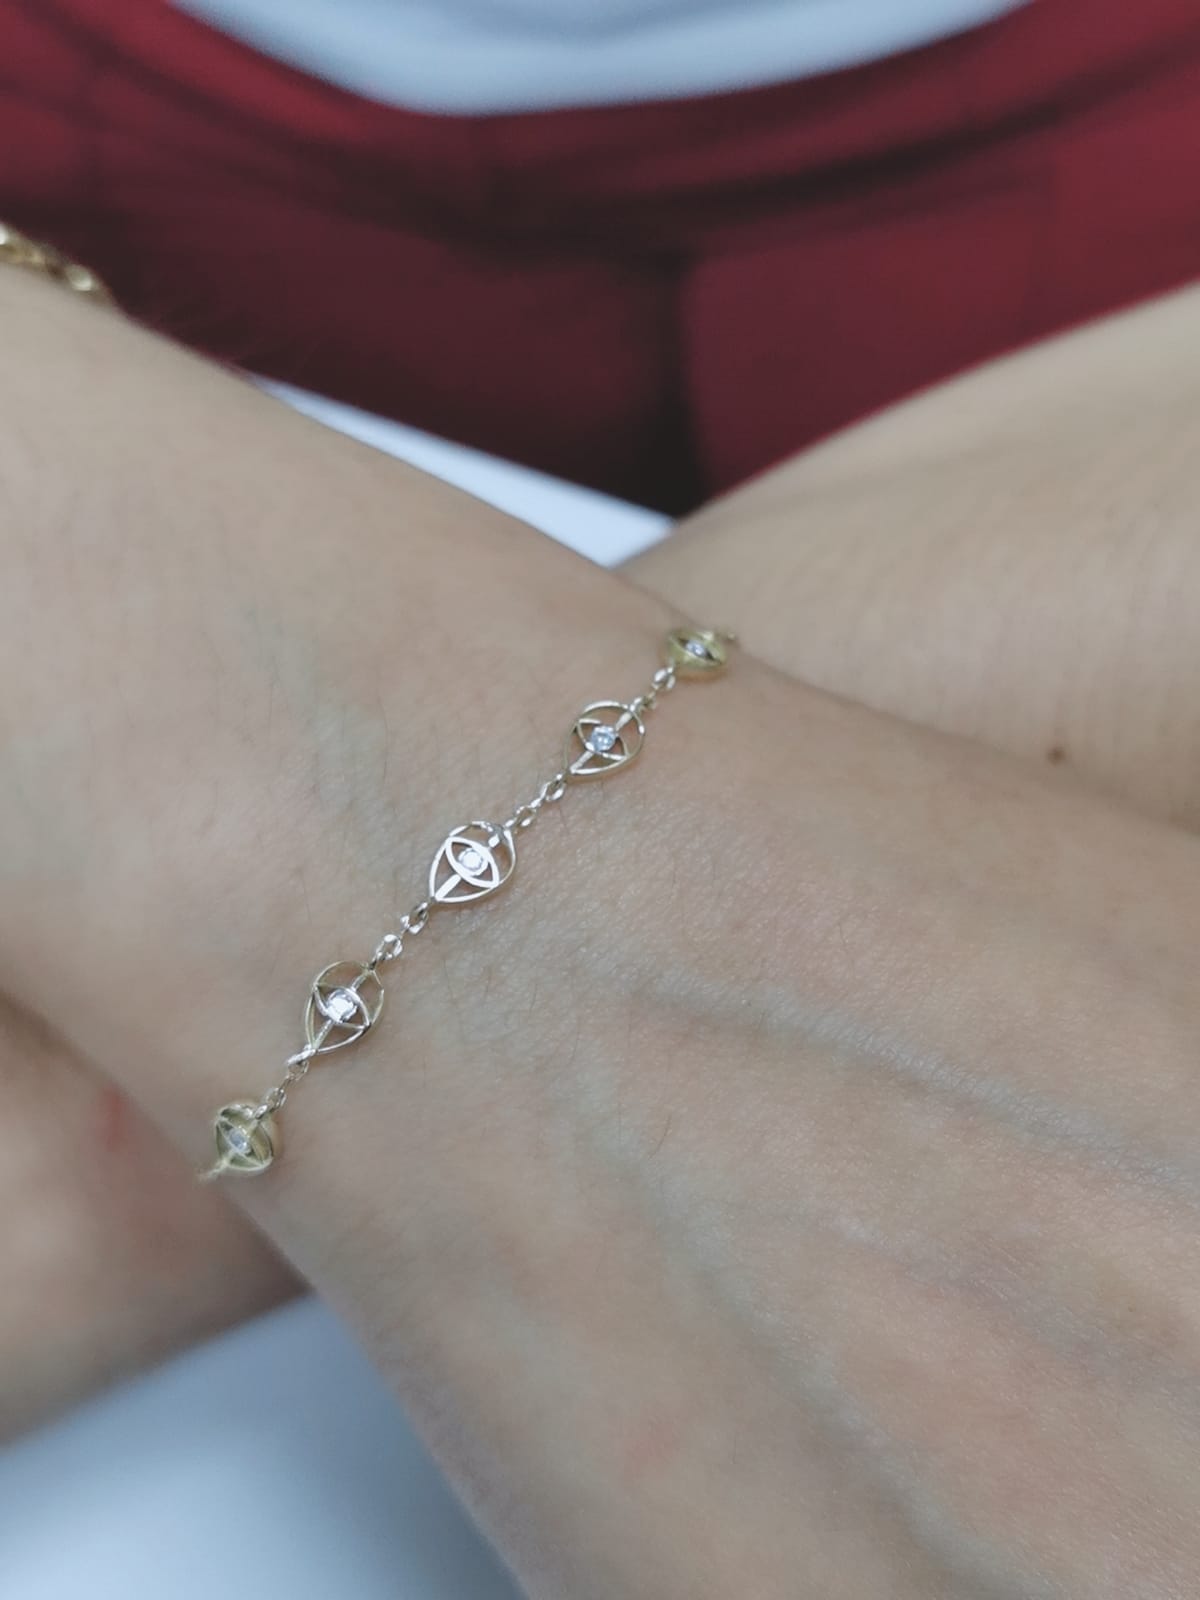 Make a statement with this sleek 18k yellow gold Diamond Bracelet. Perfect for any occasion, it can be worn on its own or as a part of a luxurious layered look.